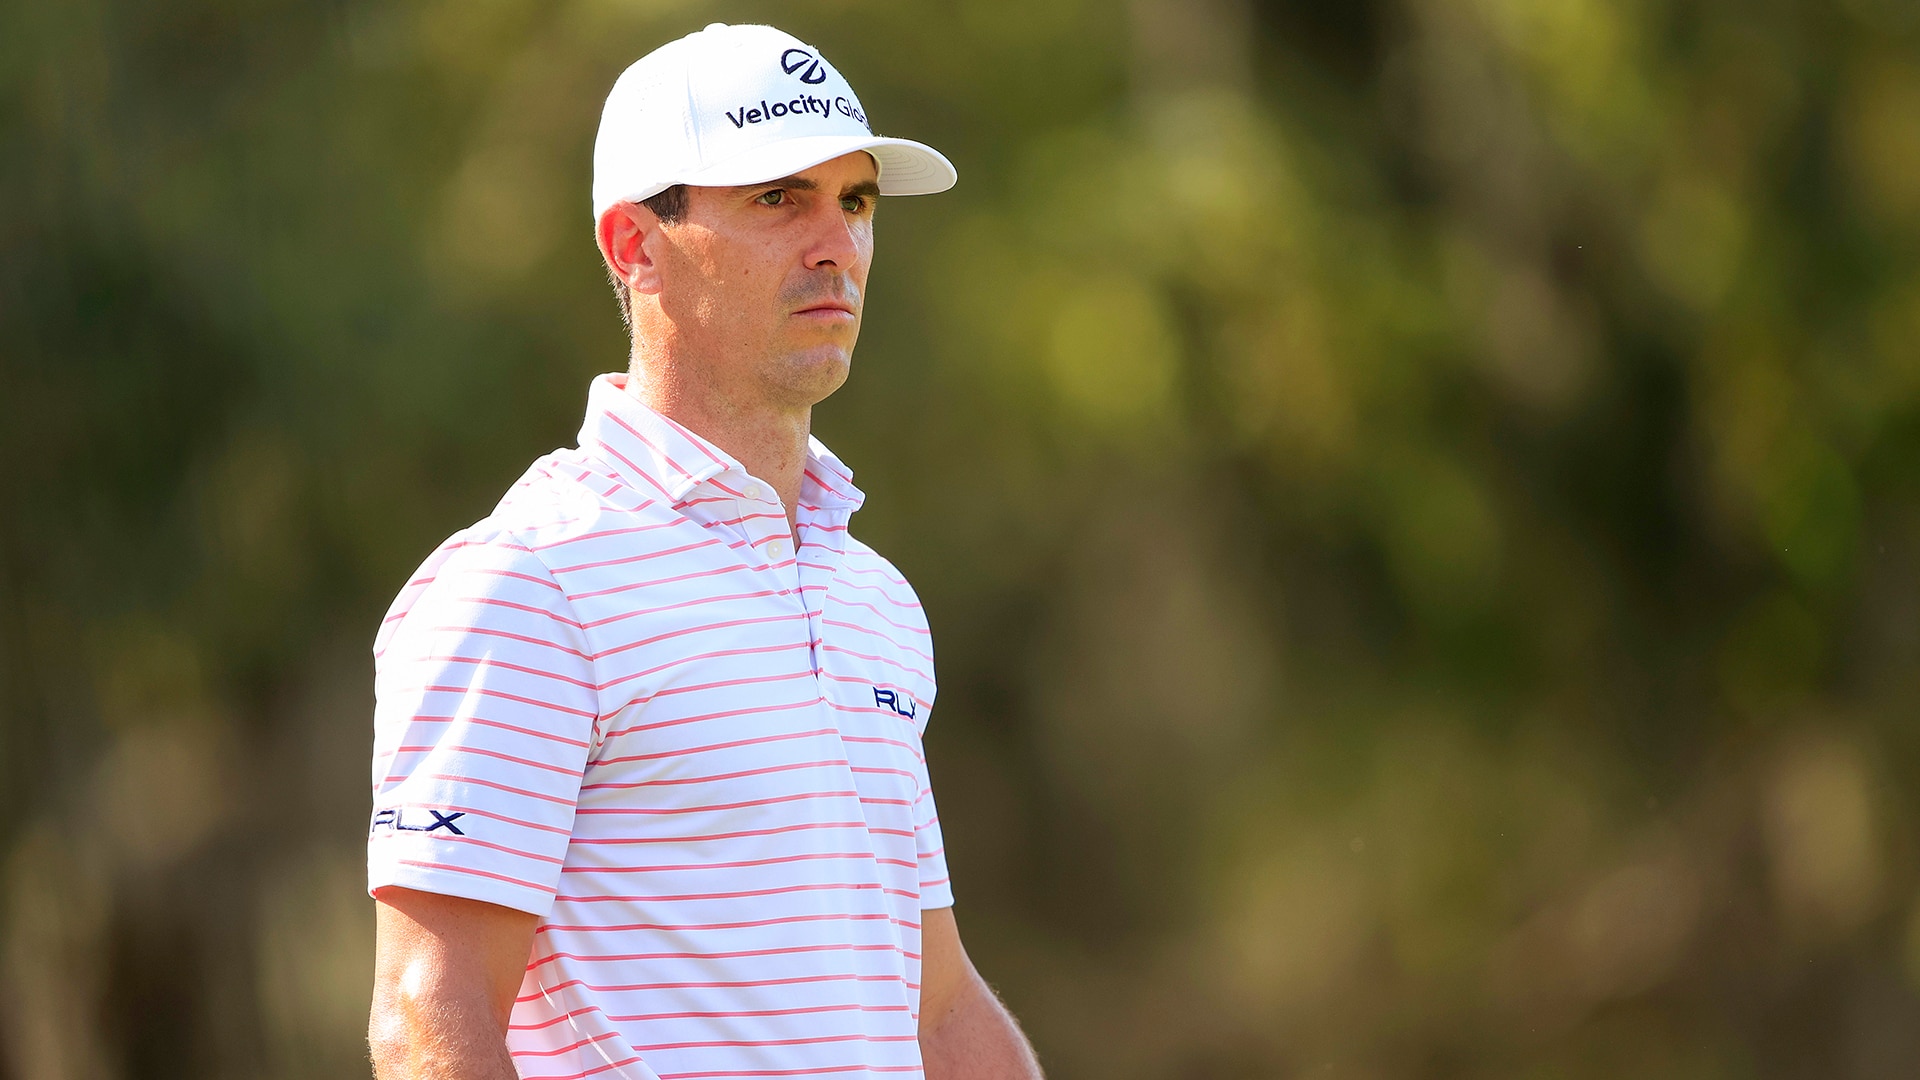 Where’s ‘Concussion’ at? Billy Horschel dishes on course setup at WGC-Workday